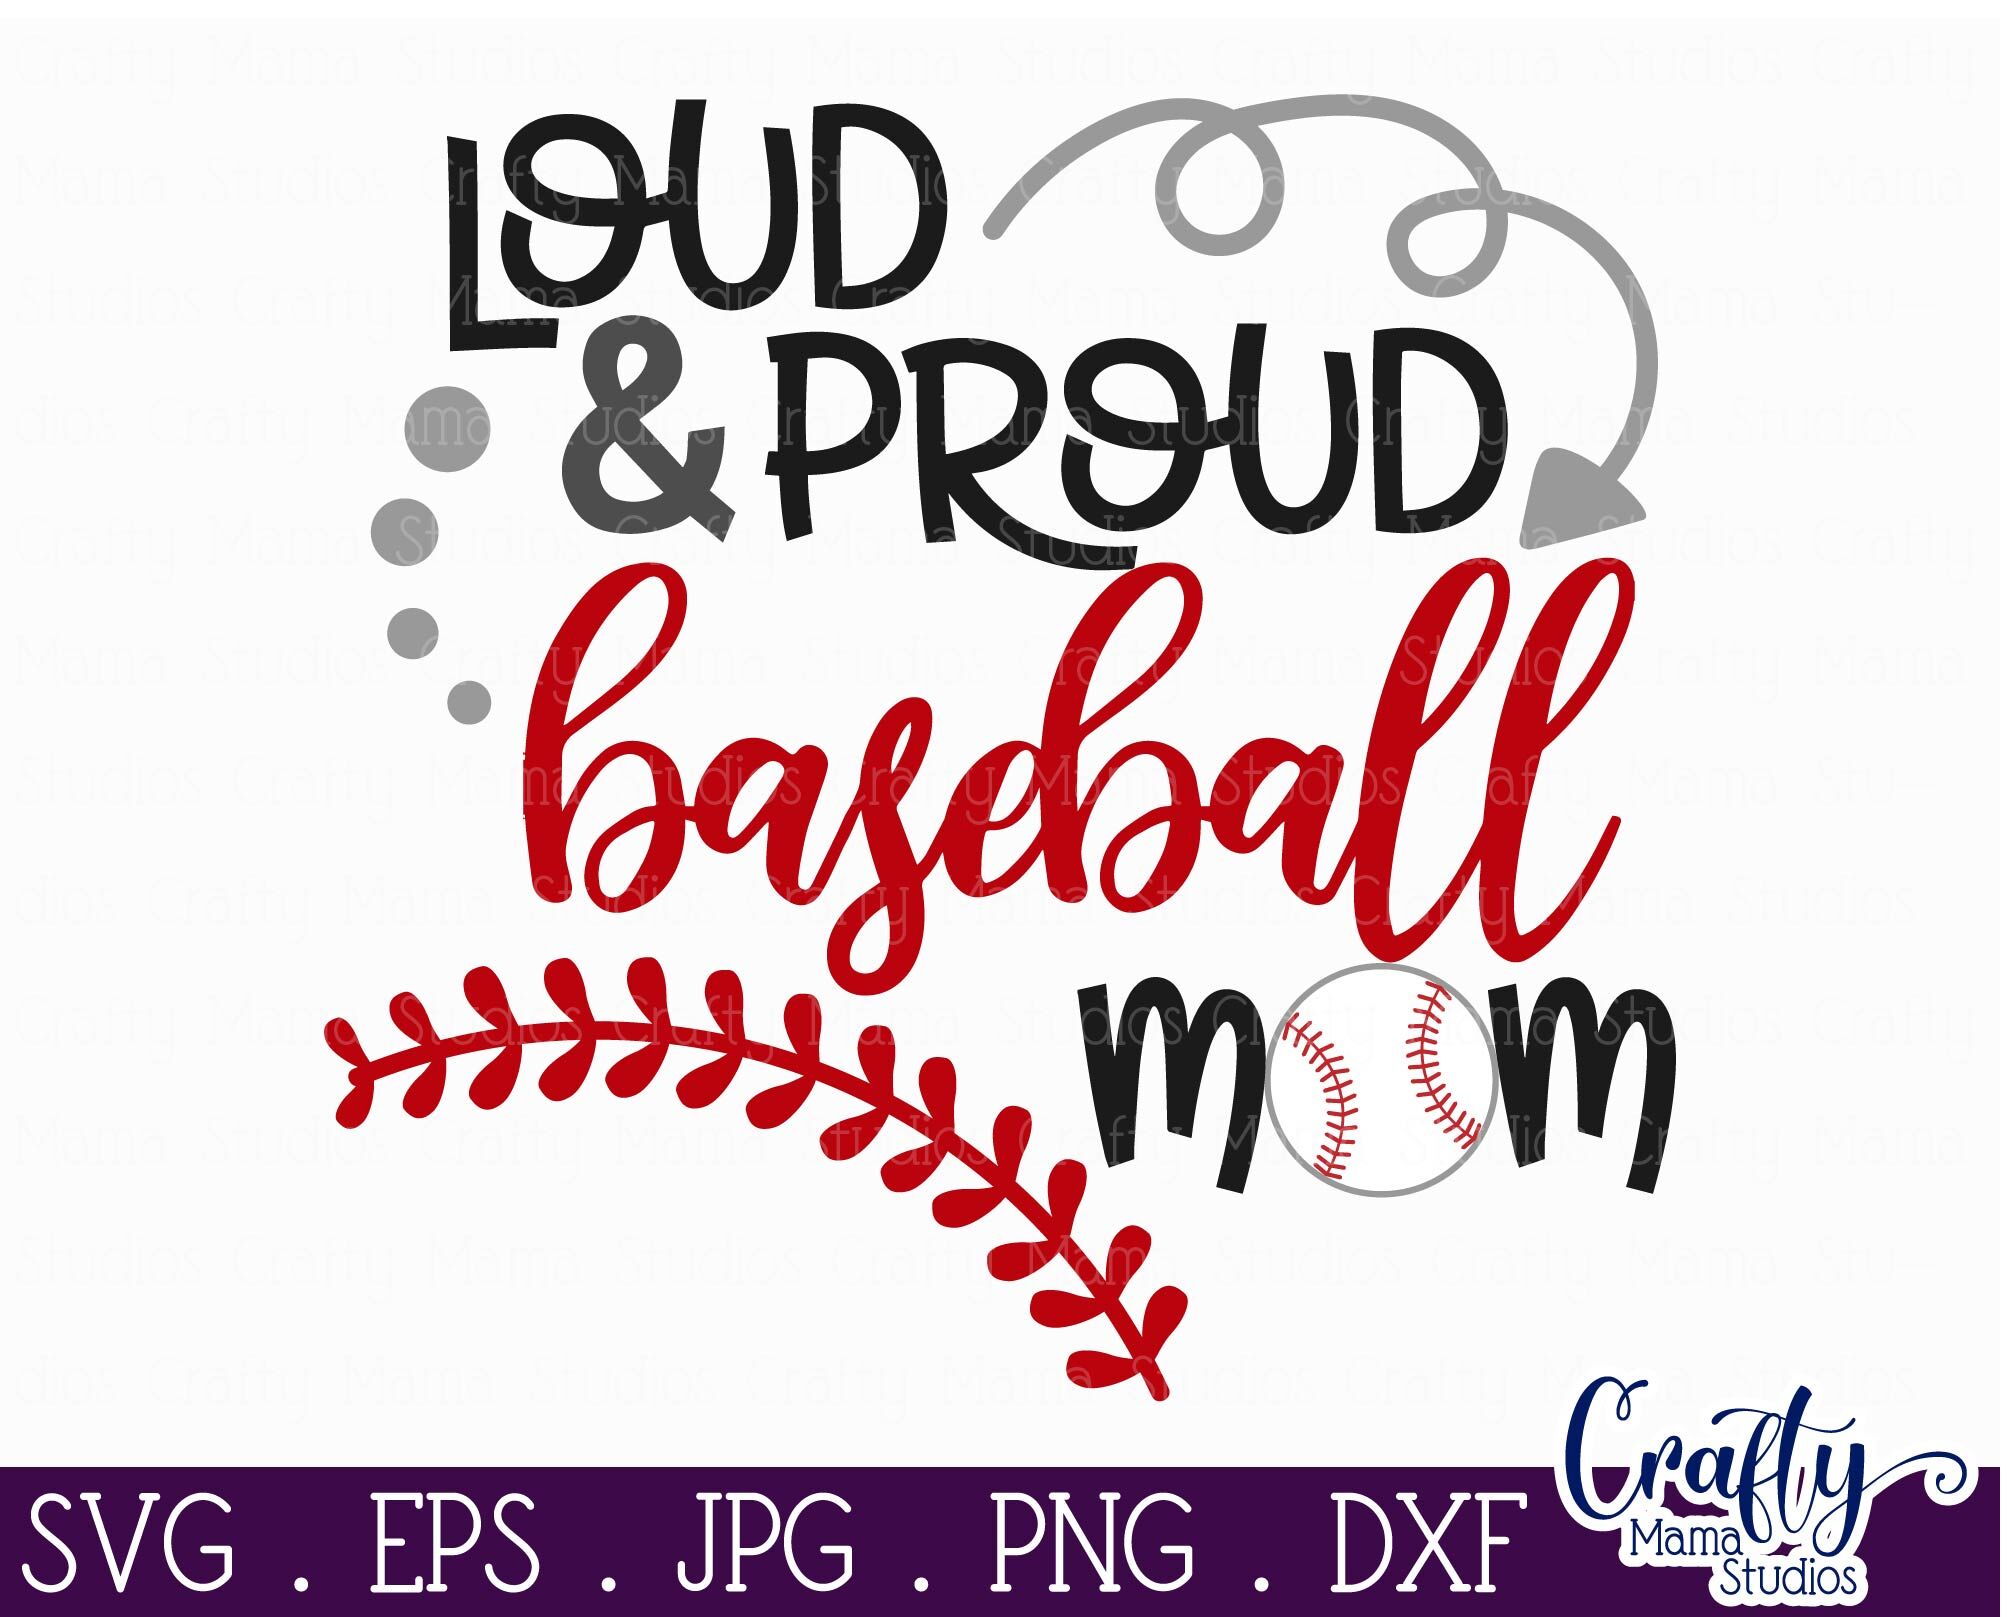 Download Loud and Proud Baseball Mom Svg, Mom Life Svg By Crafty ...